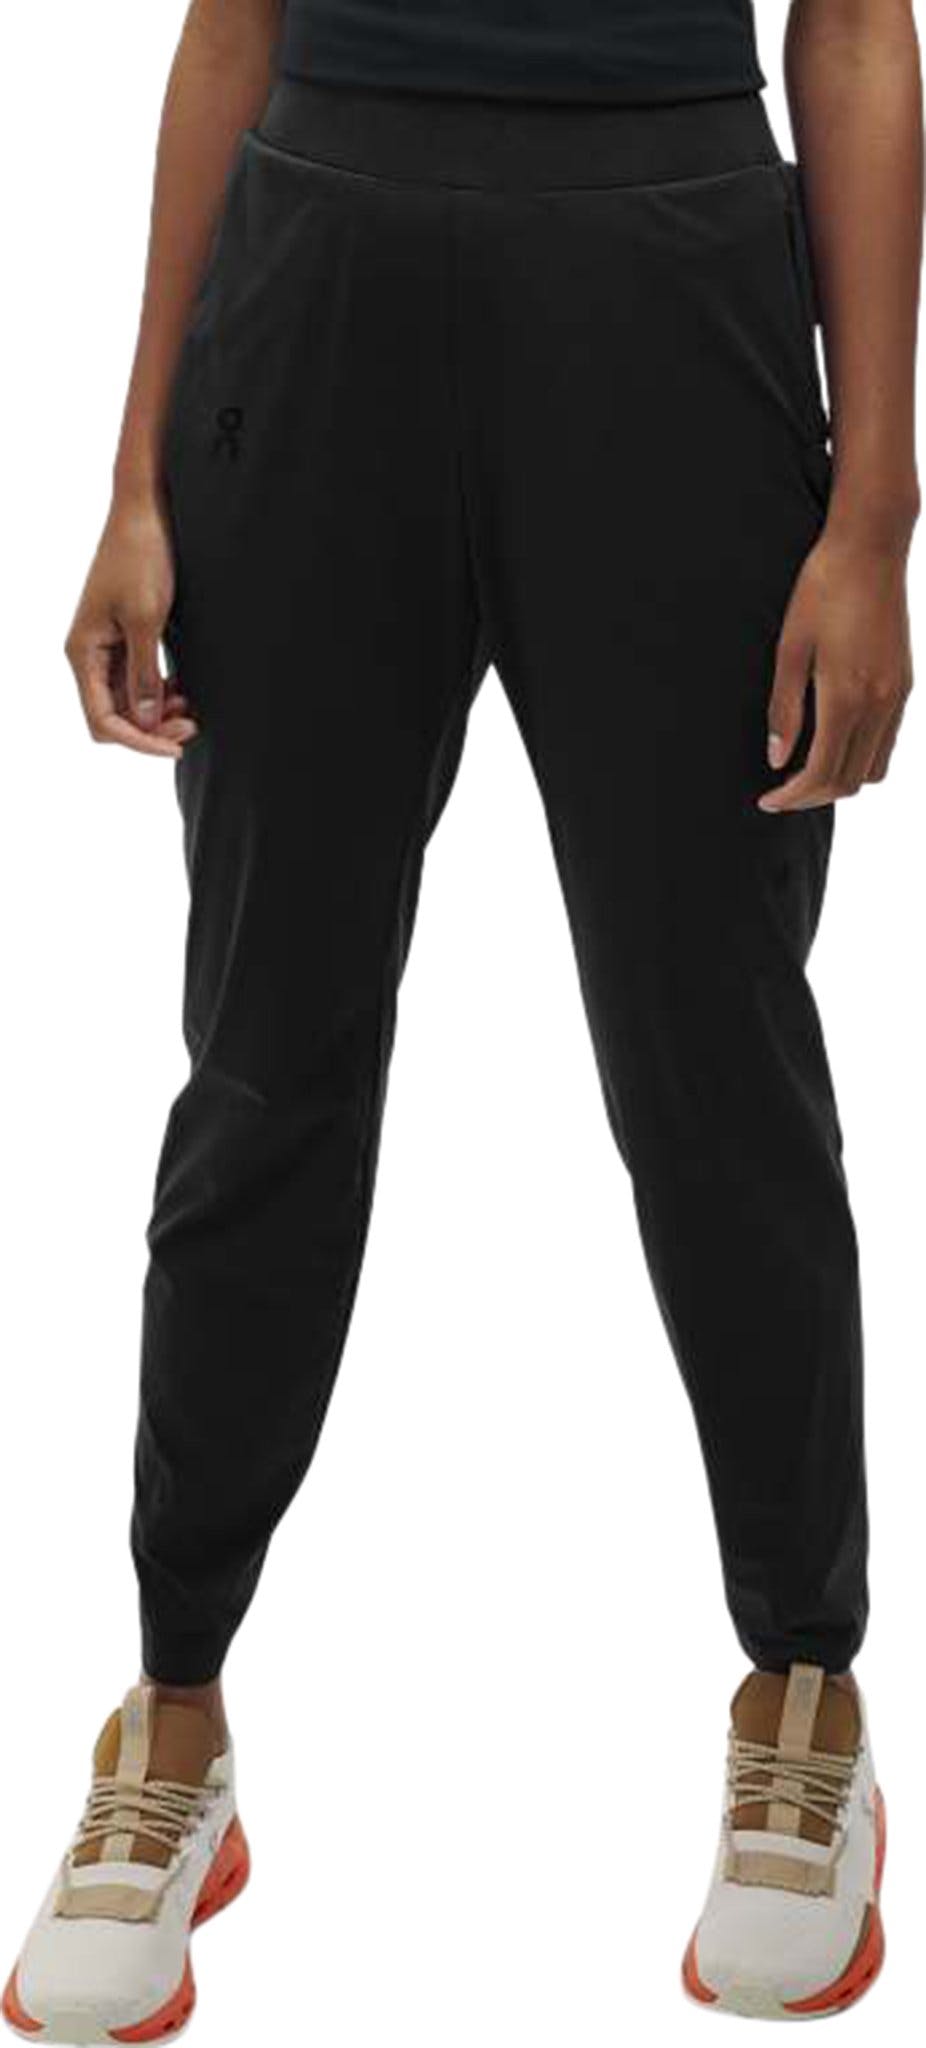 Product image for Lightweight Pants - Women's